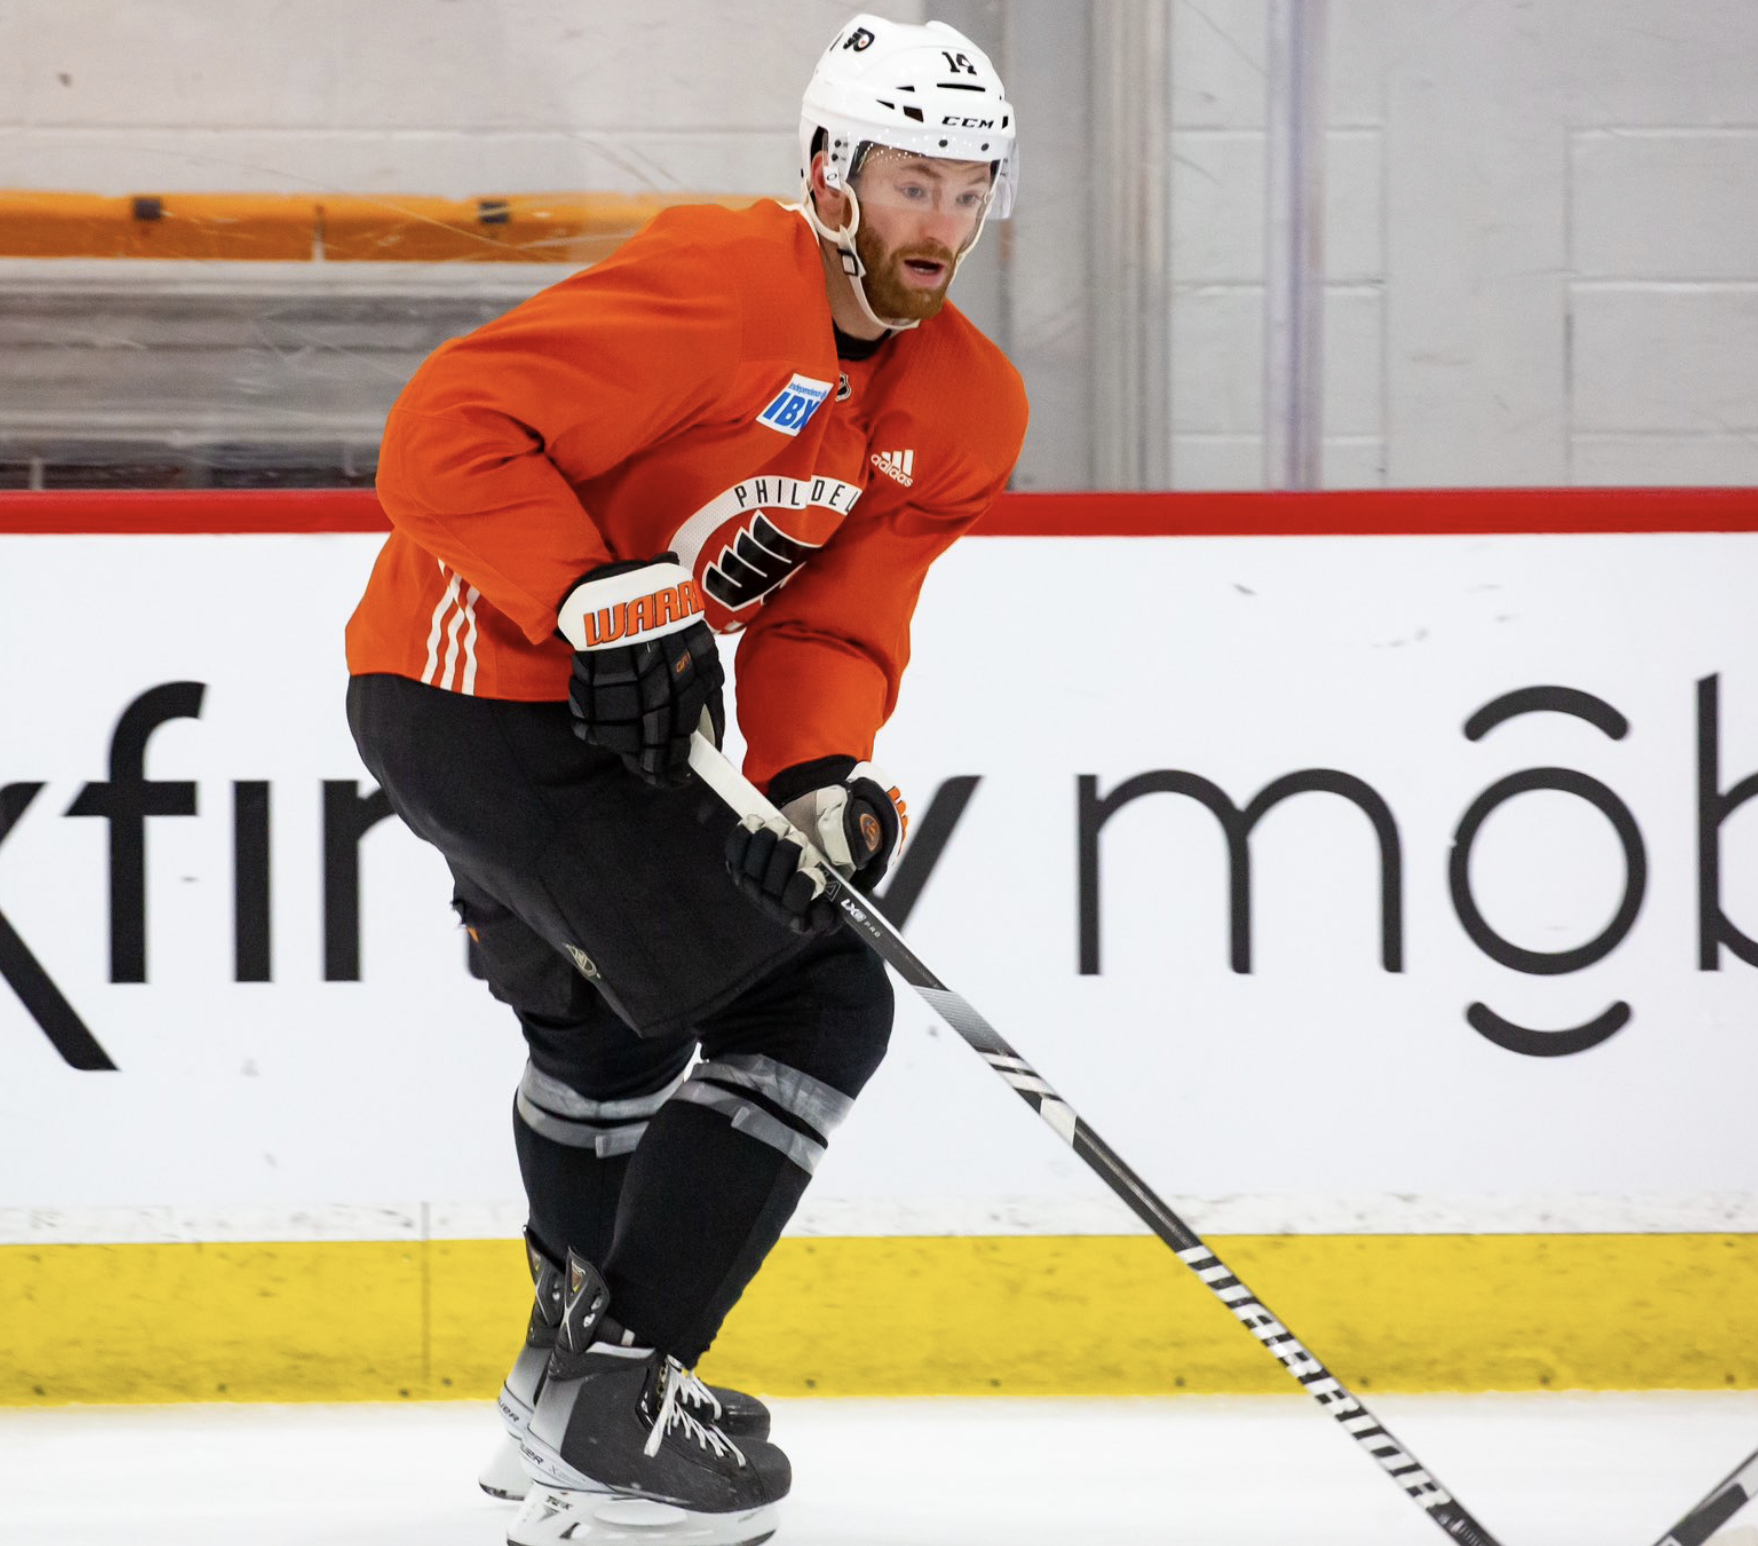 Sean Couturier skates before Rookie Camp last week (Photo provided by Flyers)